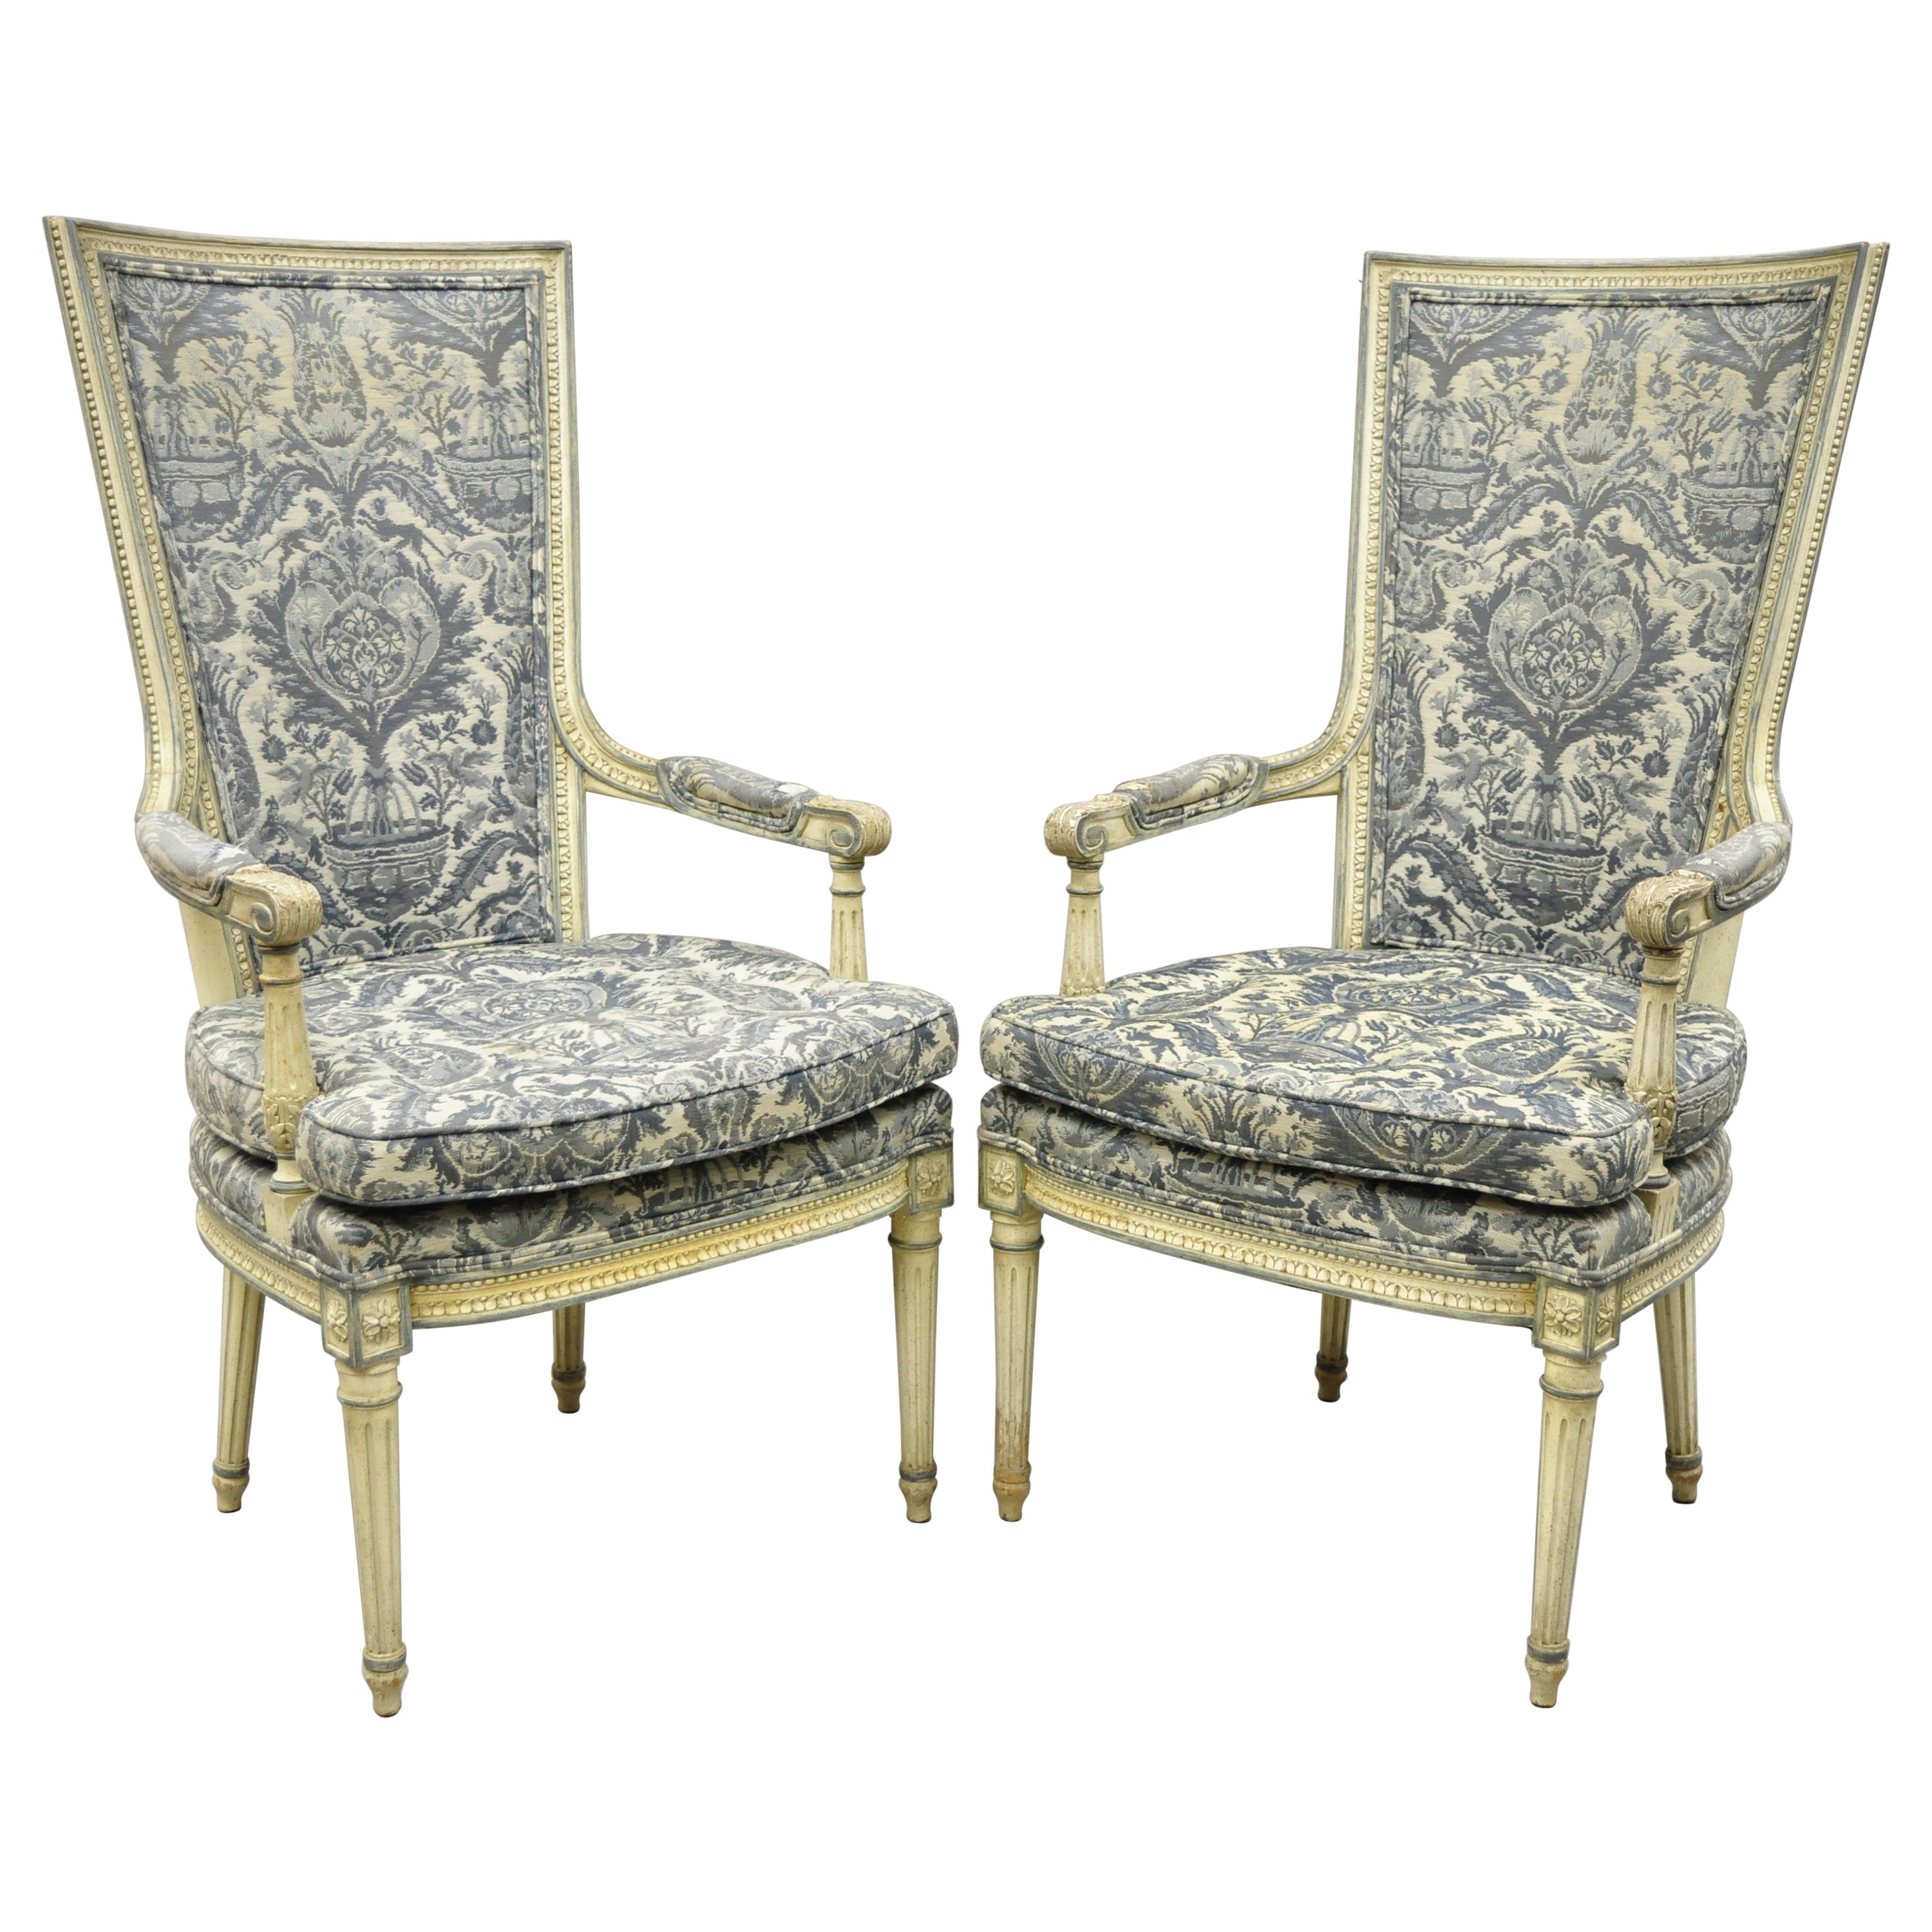 Vintage French Louis XVI Provincial Blue Cream High Back Lounge Chairs, a Pair For Sale